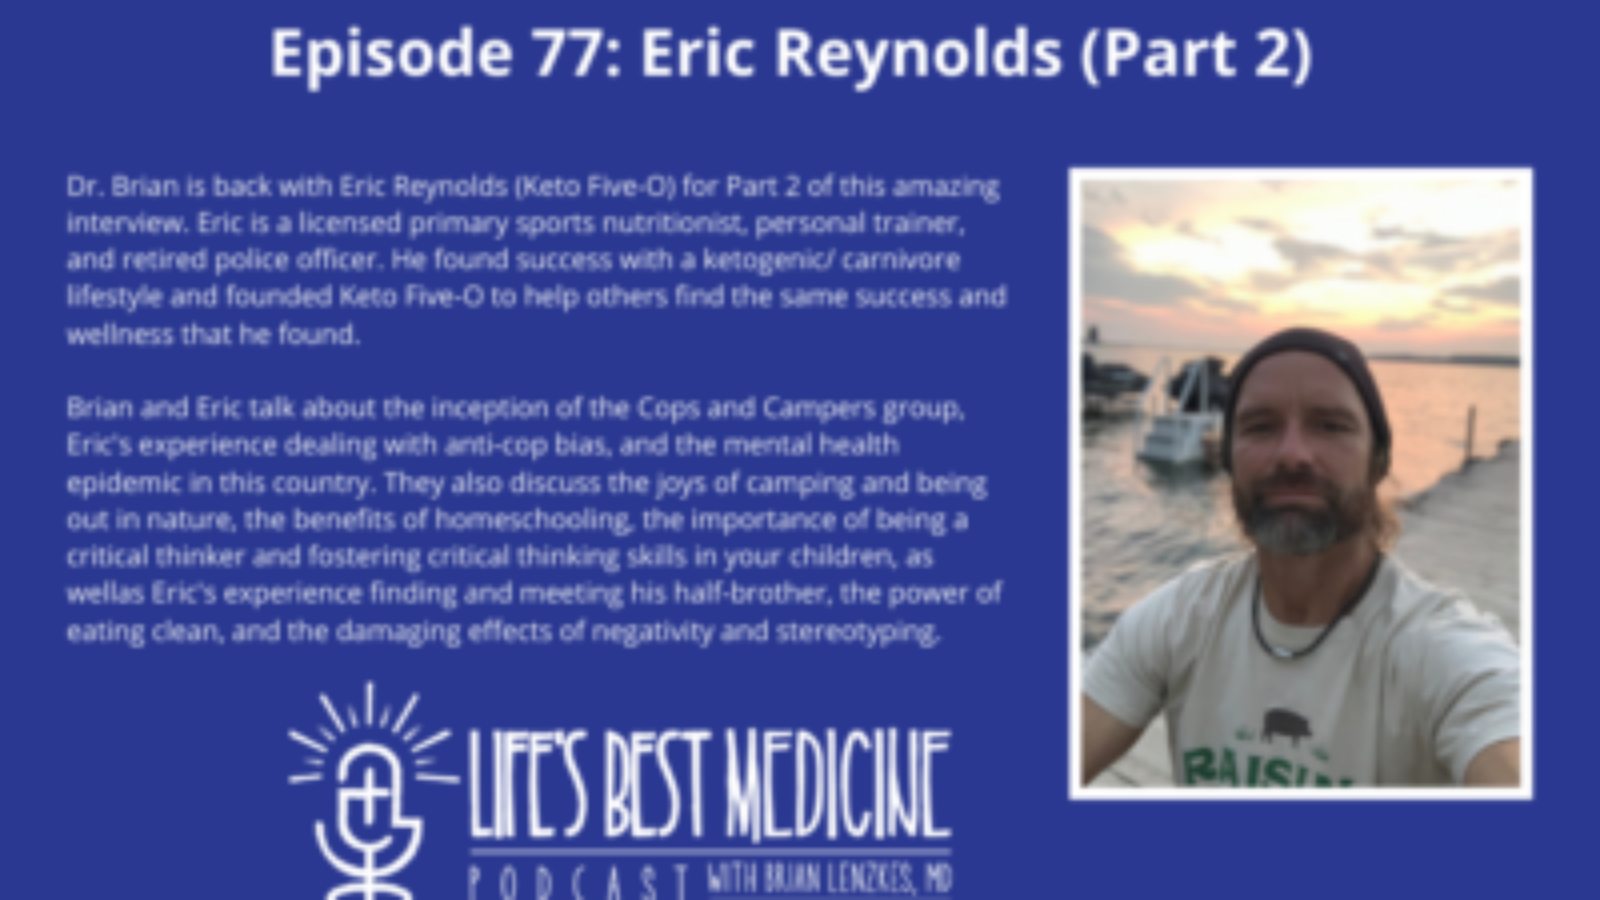 FEATURE-Episode-77-Eric-Reynolds-1-400x250-1